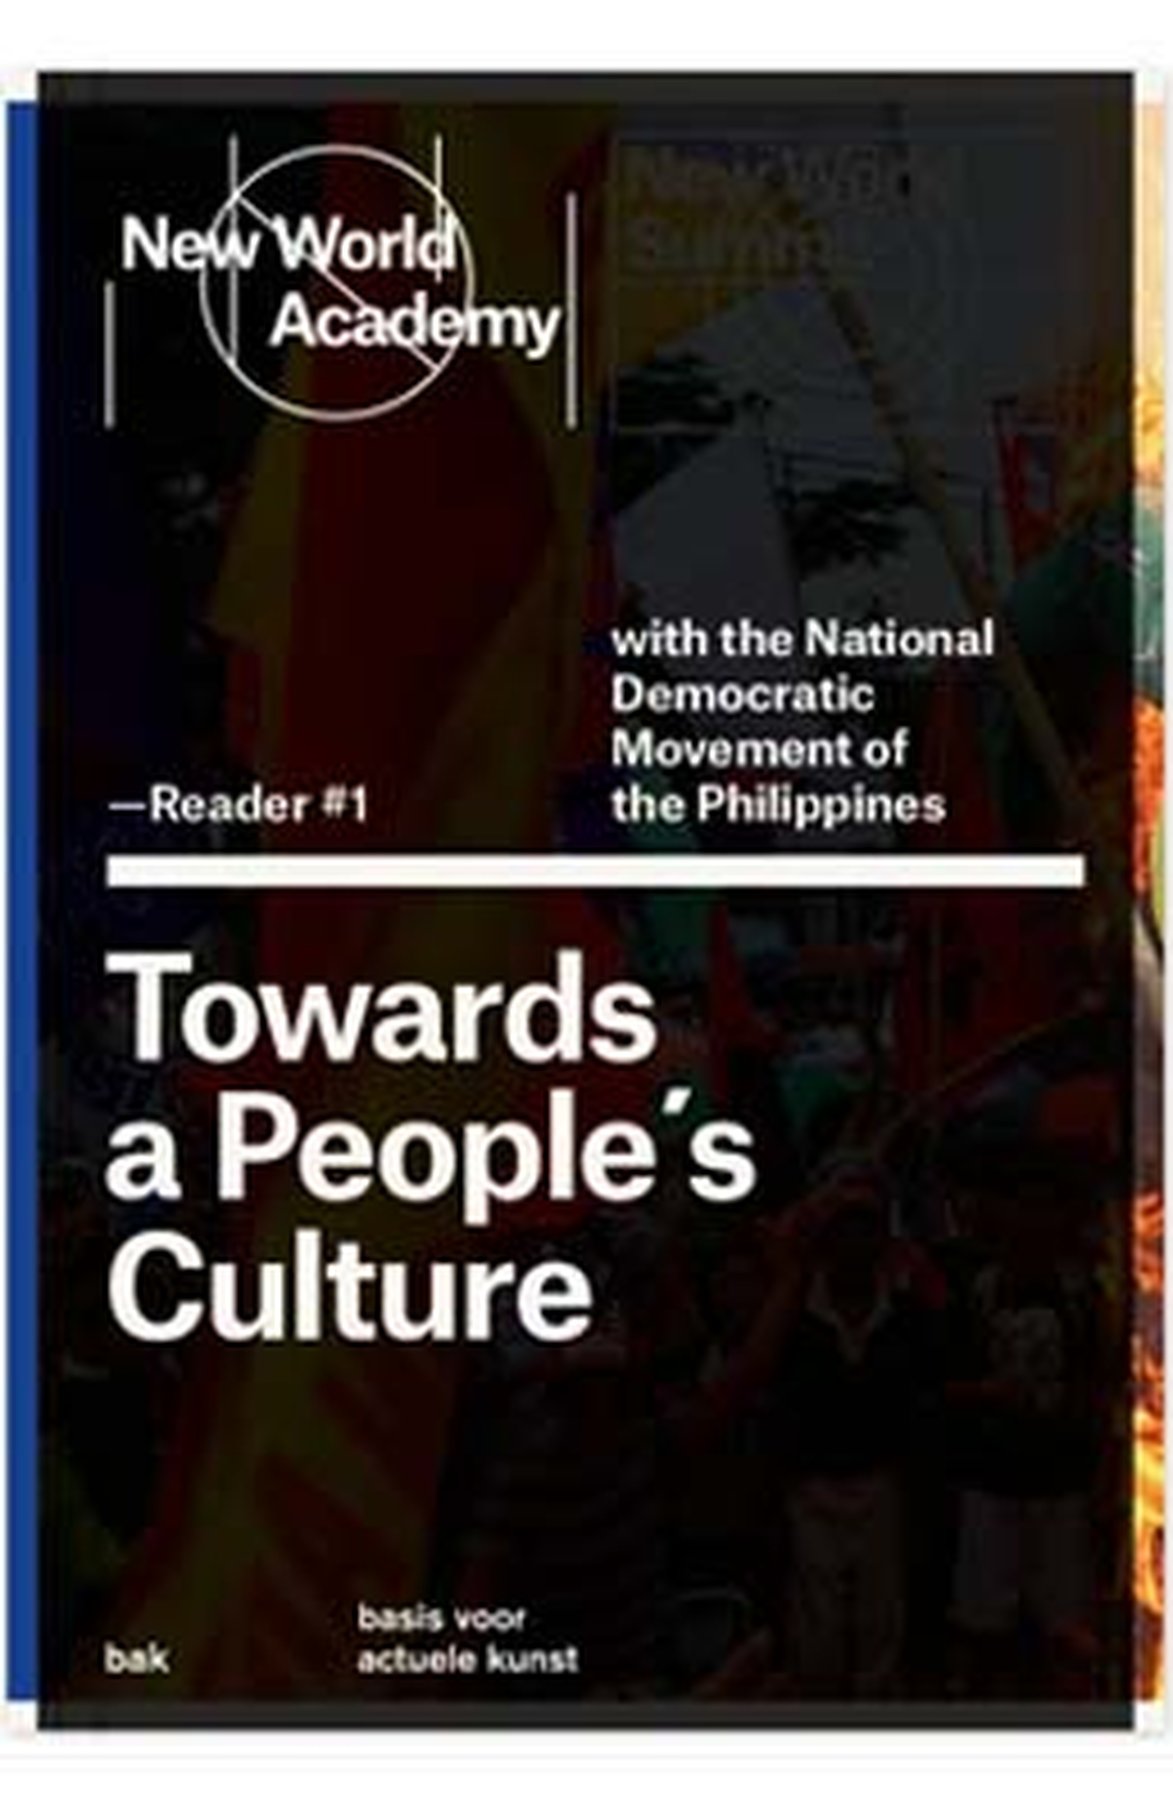 TOWARDS A PEOPLE'S CULTURE. Selection of texts on the role of art and culture in the history of the revolutionary National Democratic Movement of the Philippines, edited by Professor Jose Maria Sison and Jonas Staal. BAK, basis voor actuele kunst, Utrecht